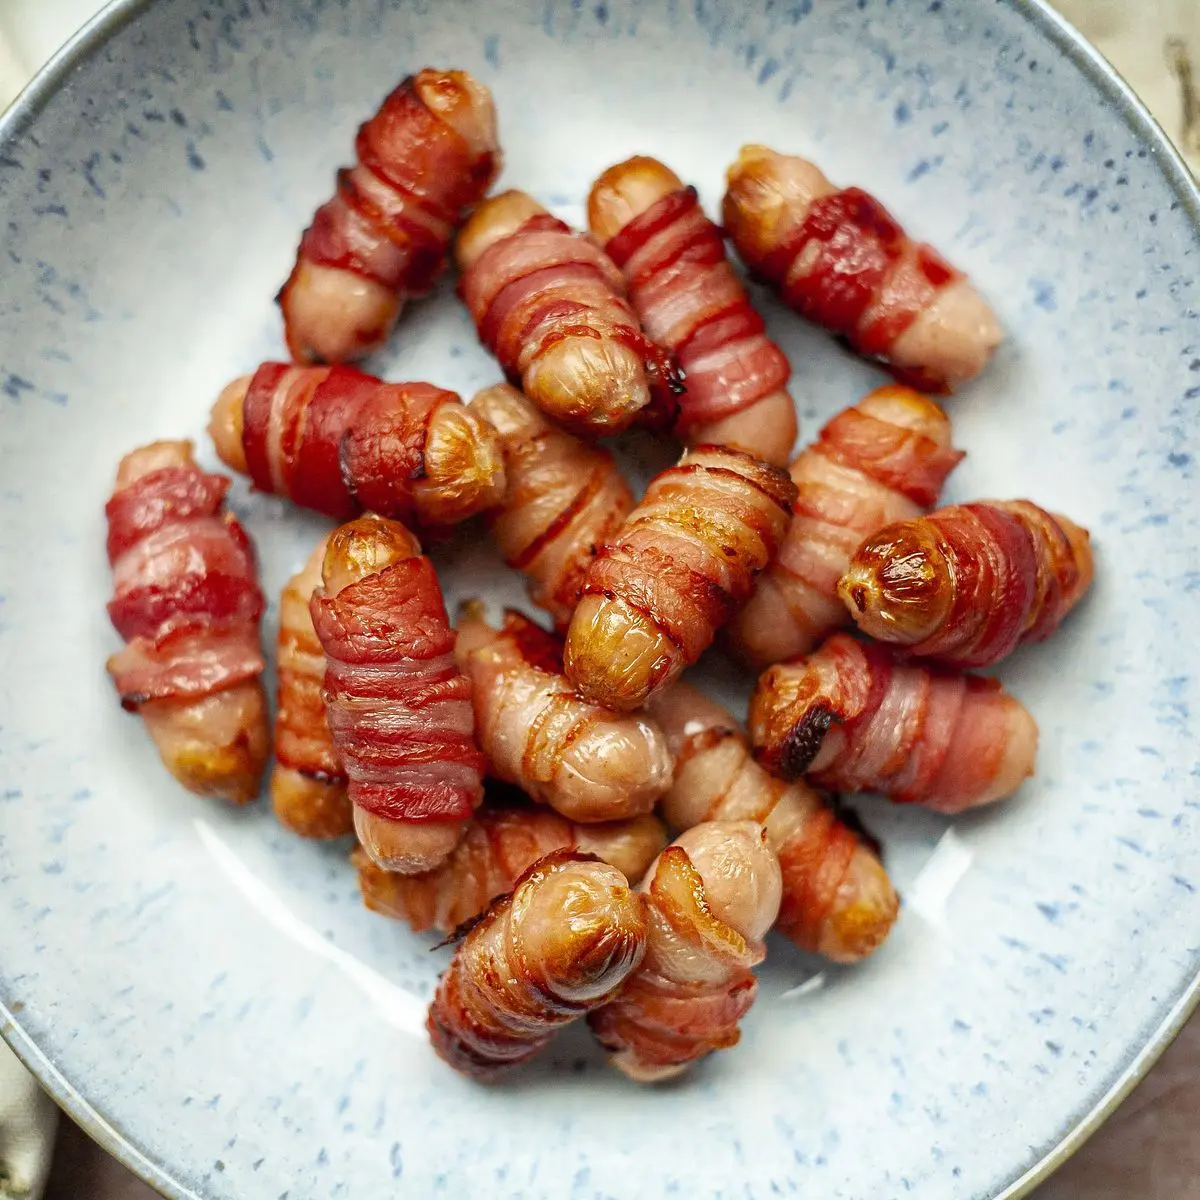 pigs in blankets smoked or unsmoked bacon - Are pigs in blankets bacon or pastry